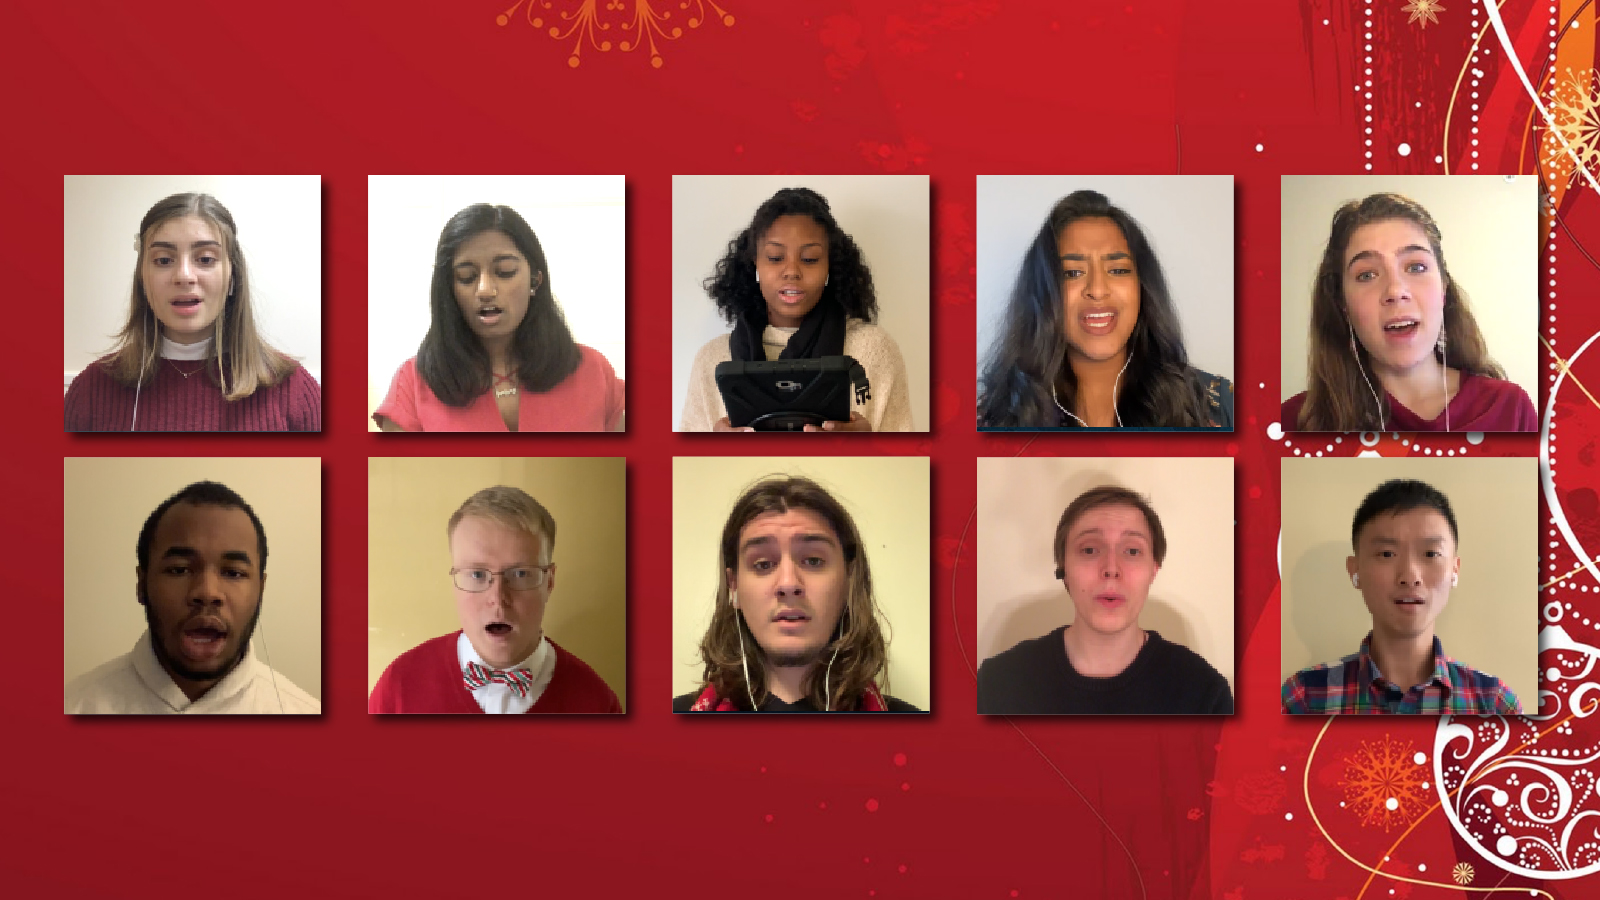  10 virtual singers in tiles on a red background.